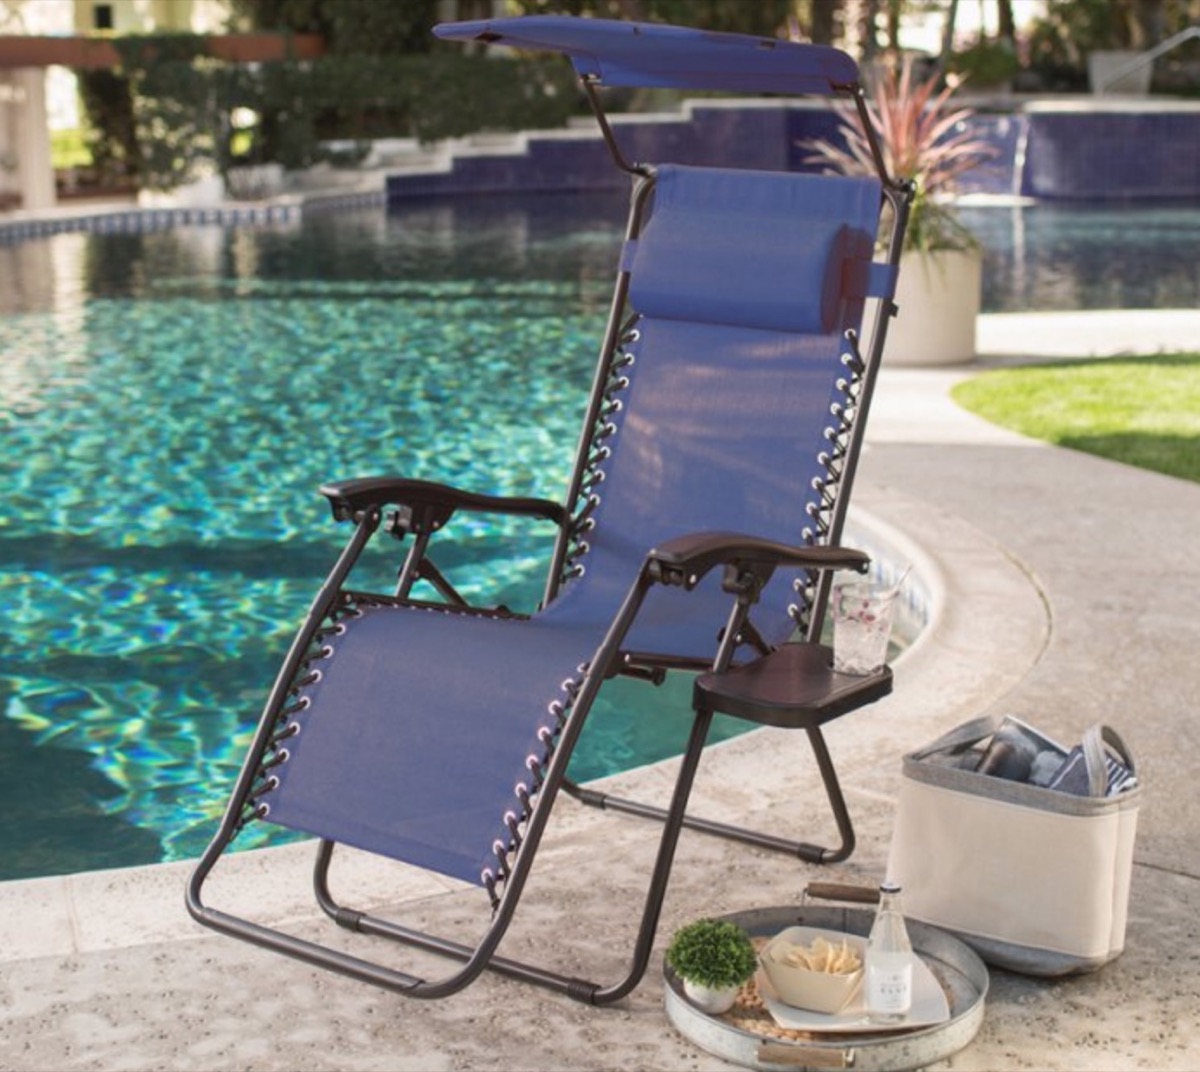 blue reclining chair by pool